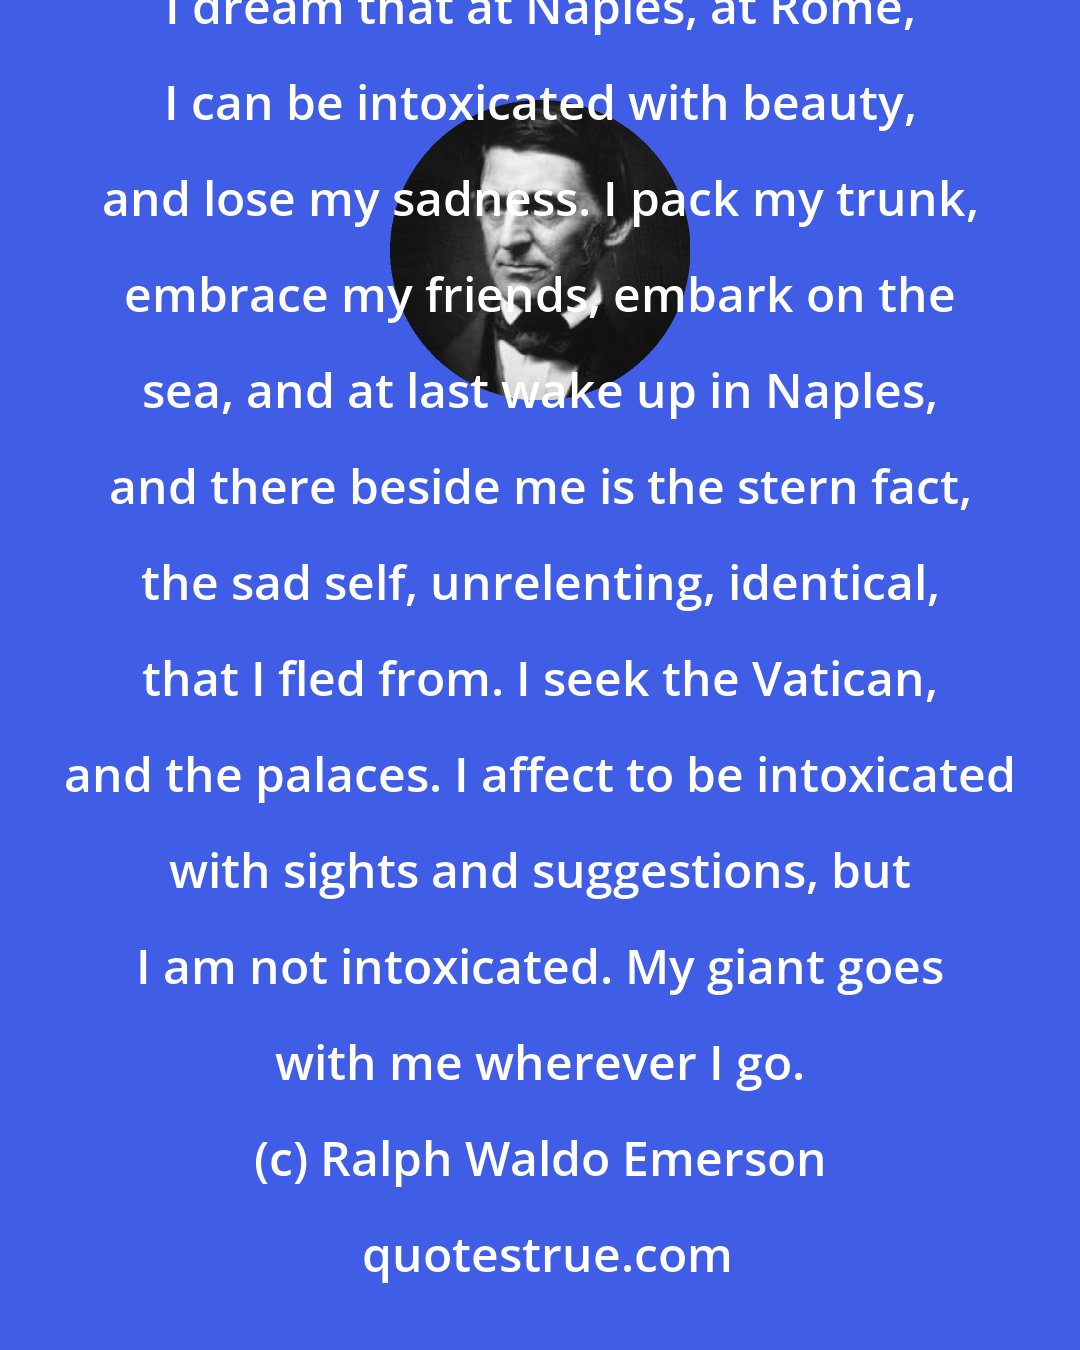 Ralph Waldo Emerson: Traveling is a fool's paradise. Our first journeys discover to us the indifference of places. At home I dream that at Naples, at Rome, I can be intoxicated with beauty, and lose my sadness. I pack my trunk, embrace my friends, embark on the sea, and at last wake up in Naples, and there beside me is the stern fact, the sad self, unrelenting, identical, that I fled from. I seek the Vatican, and the palaces. I affect to be intoxicated with sights and suggestions, but I am not intoxicated. My giant goes with me wherever I go.